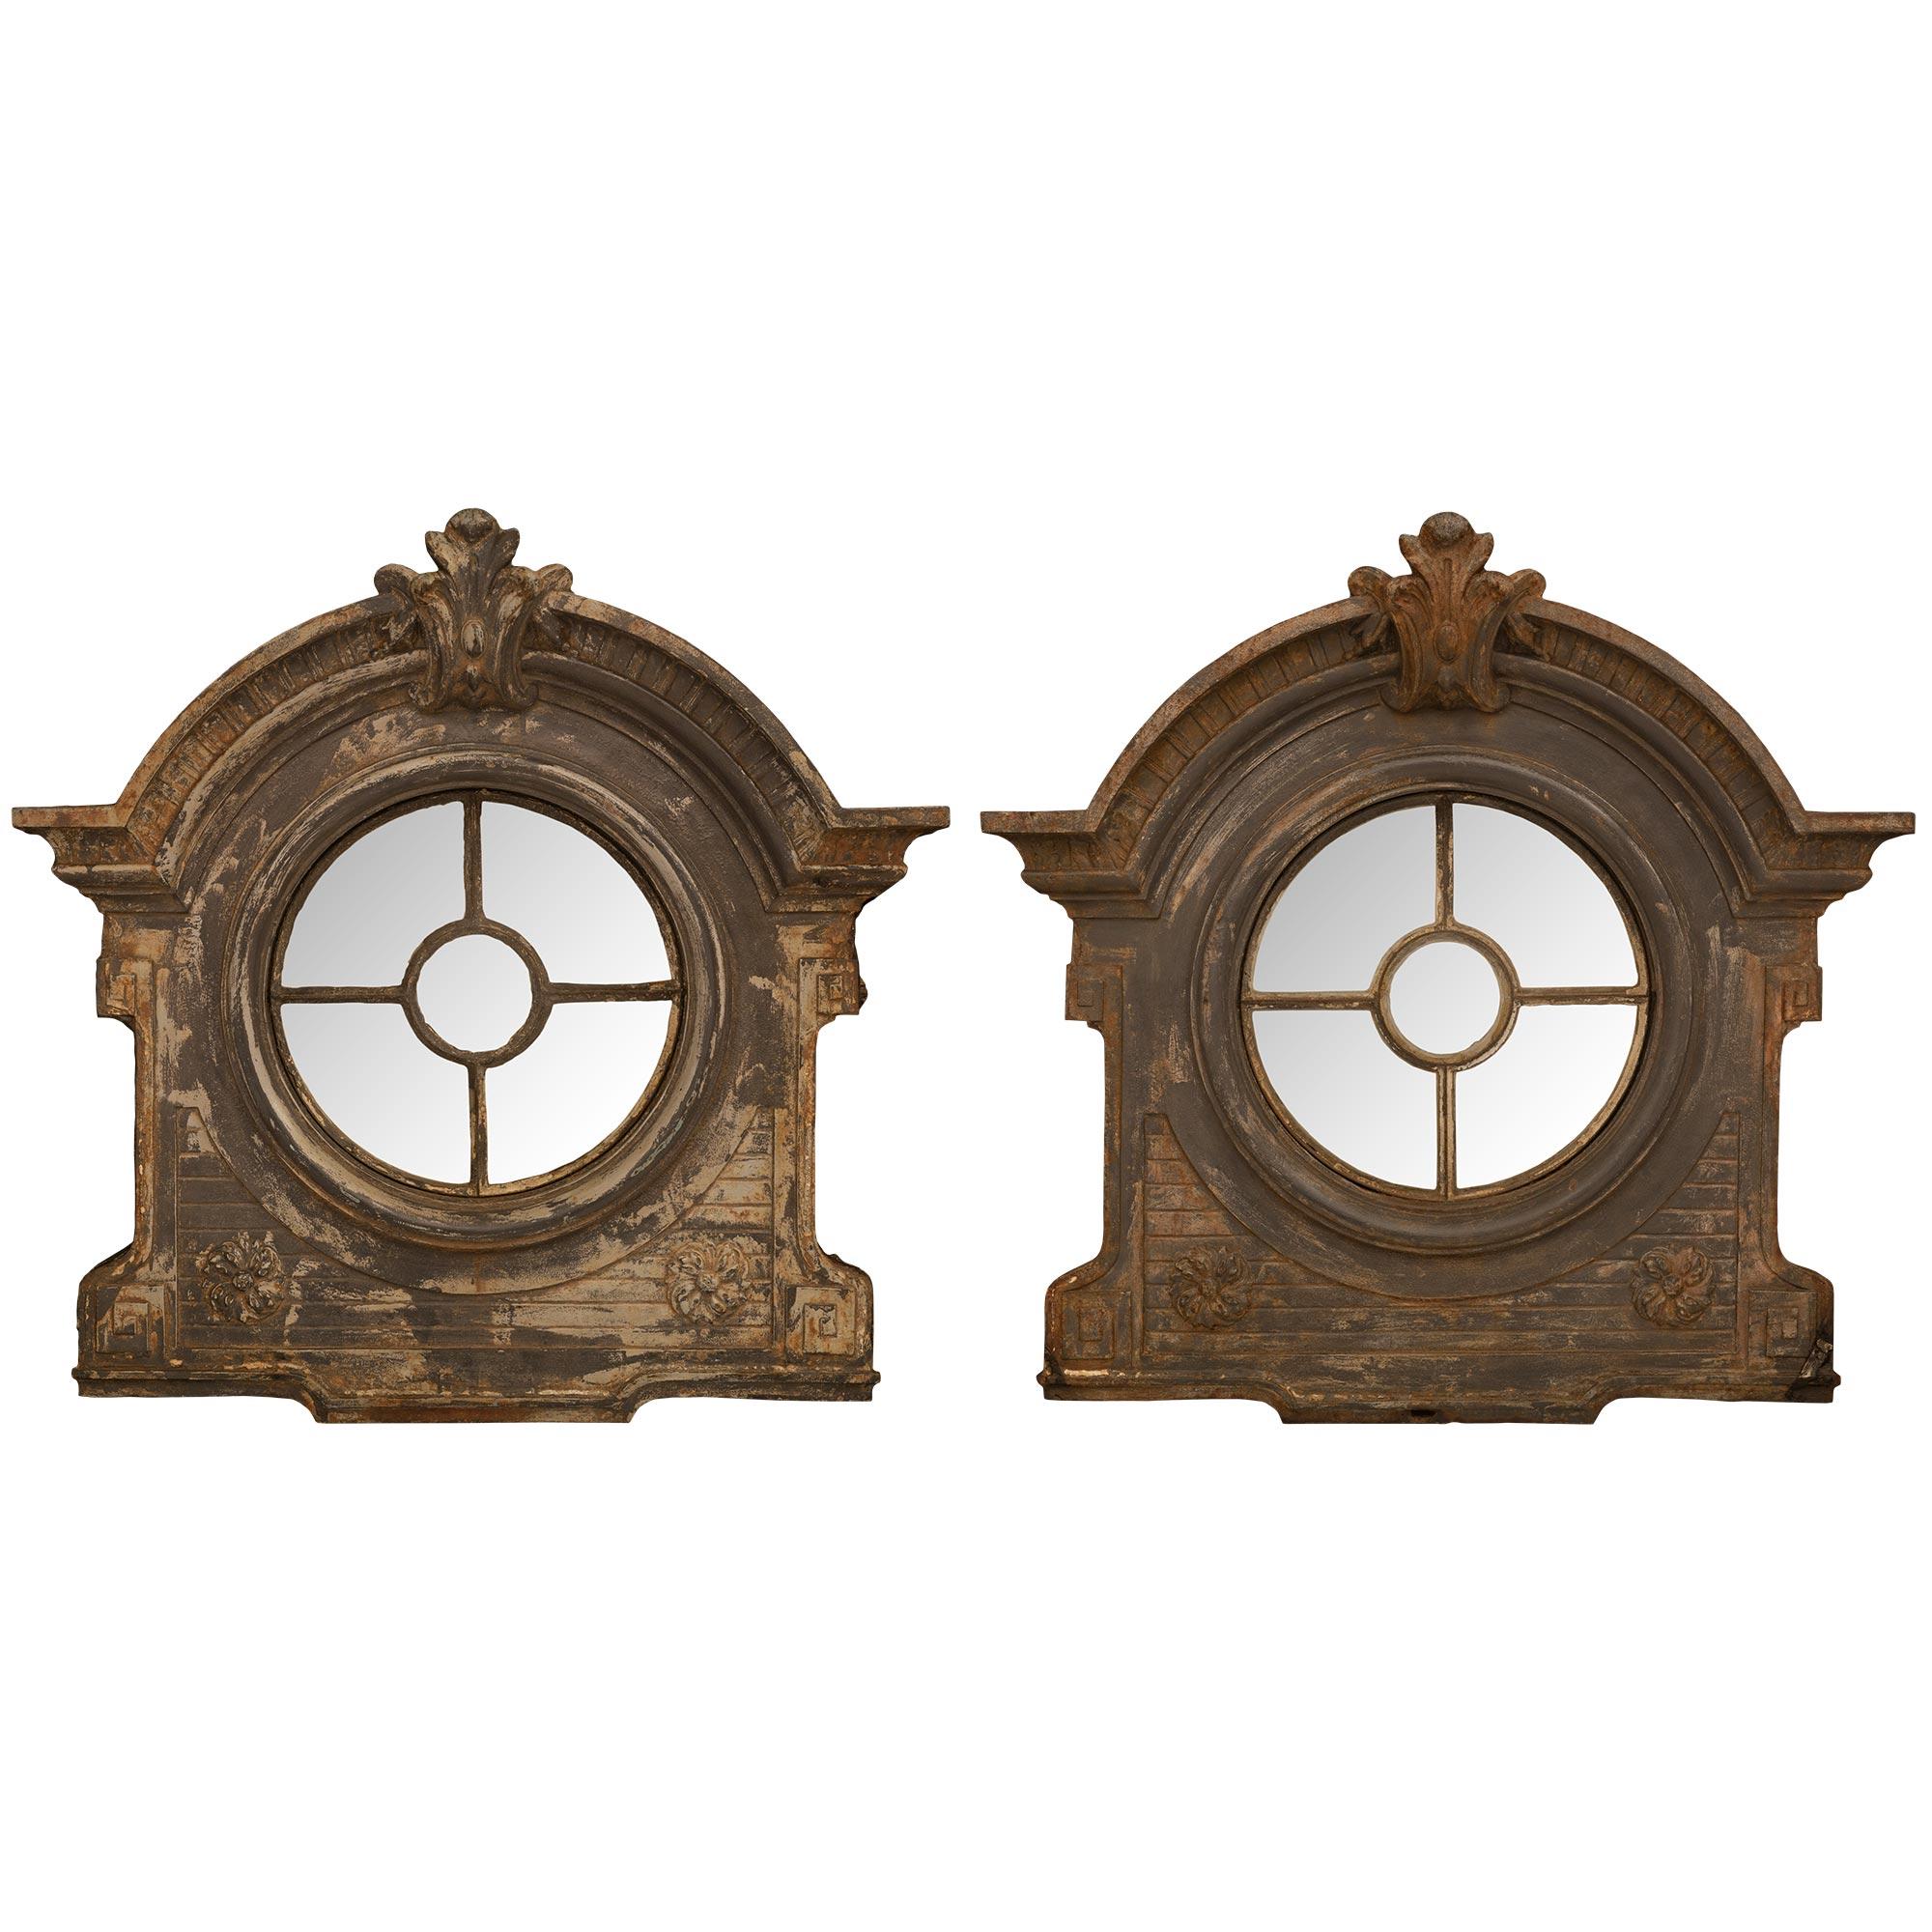 Pair Of French 19th Century Patinated Metal Windows/Wall Decor For Sale